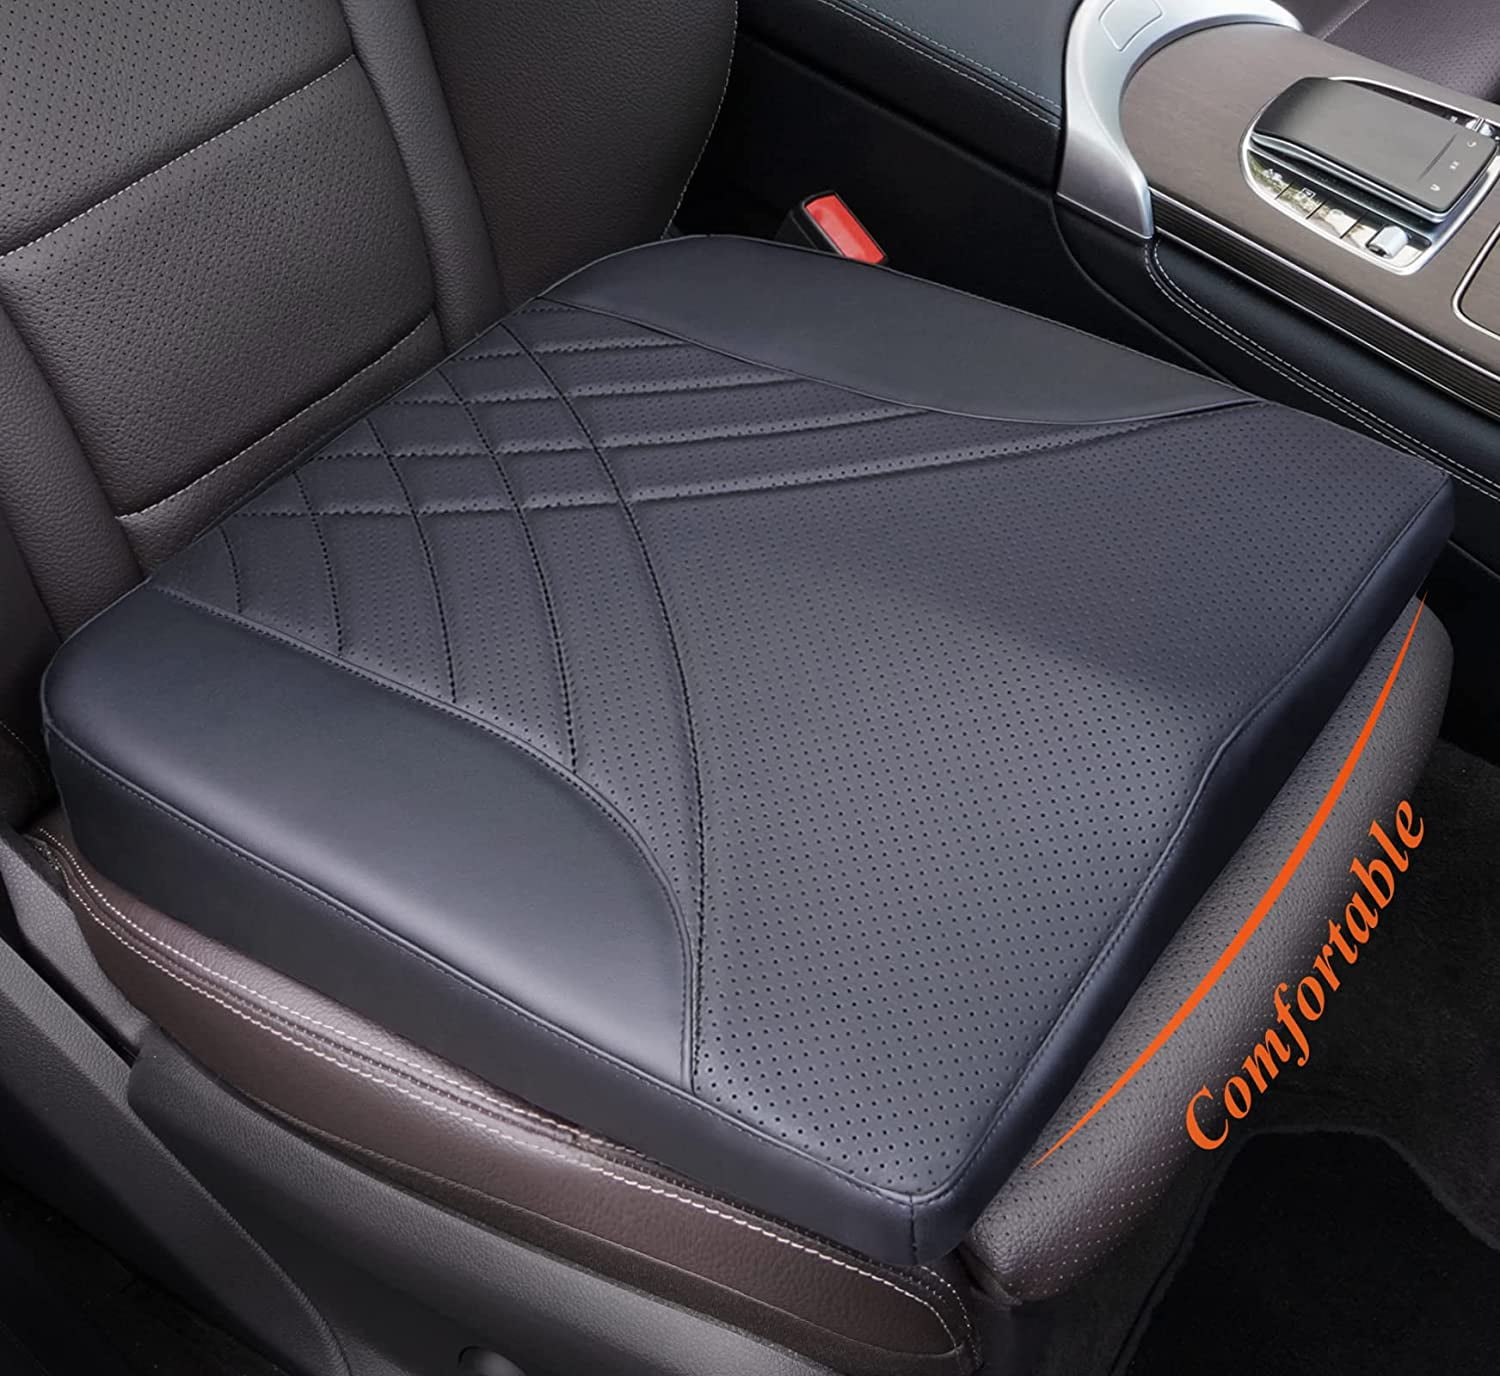 for Office Chair Wheelchair Etc. Beige Car Seat TISHIJIE Memory Foam Seat Cushions for Pressure Relief Coccyx Cushion & Tailbone Pain Relief Cushion 